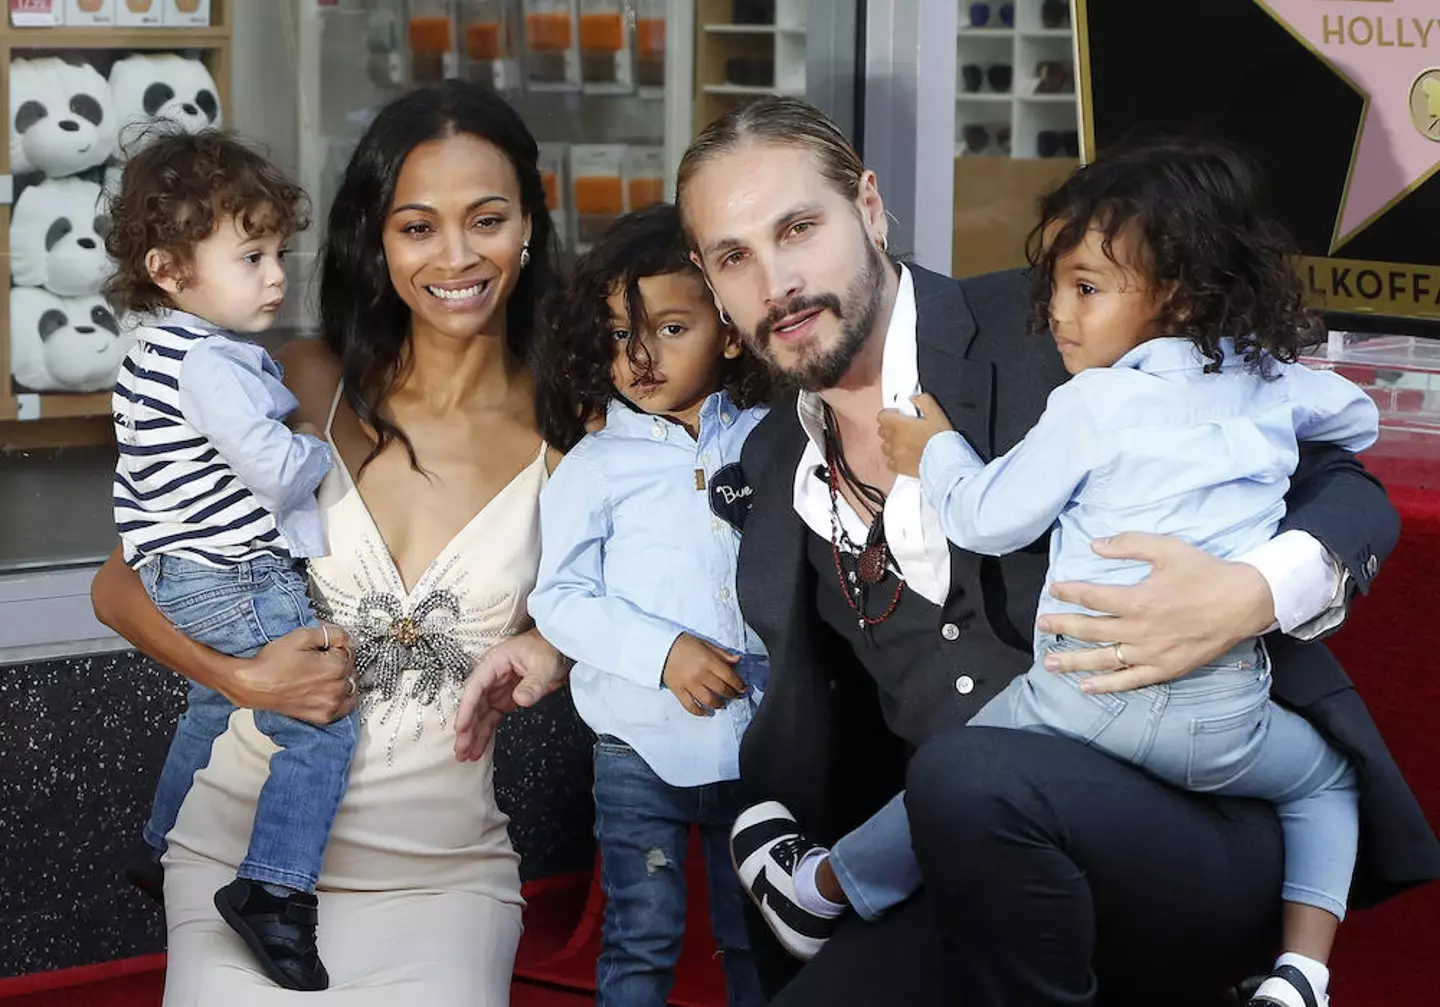 The Hollywood star shares three kids with her husband.